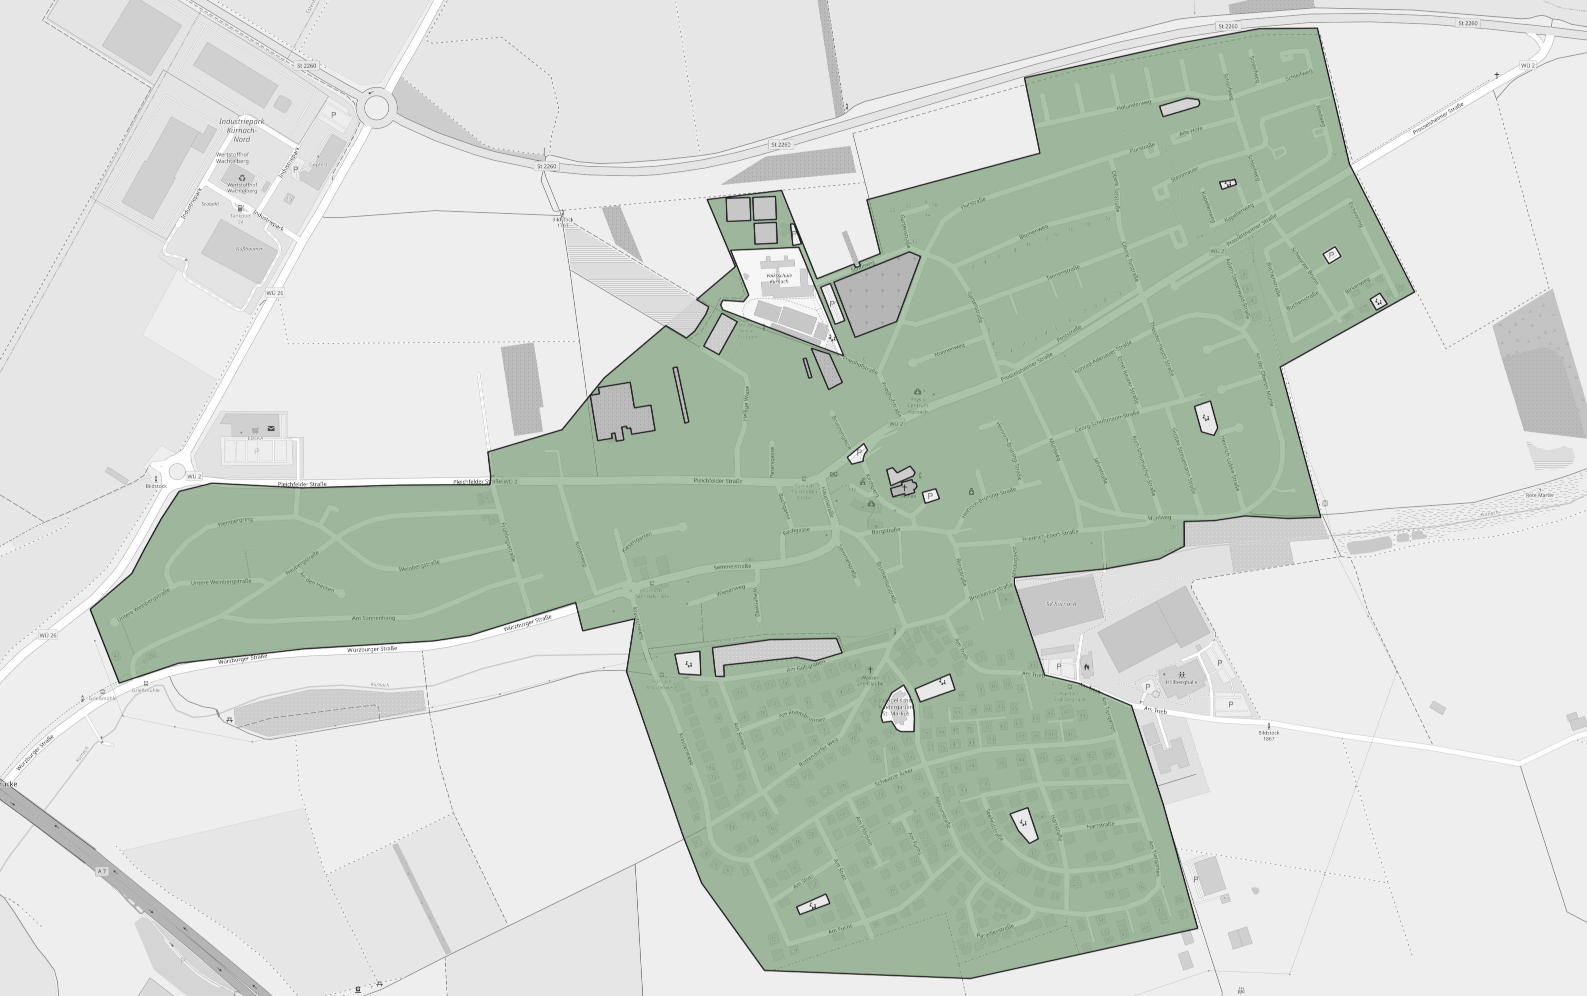 Map of one residential land use after subtracting unwanted overlapping areas